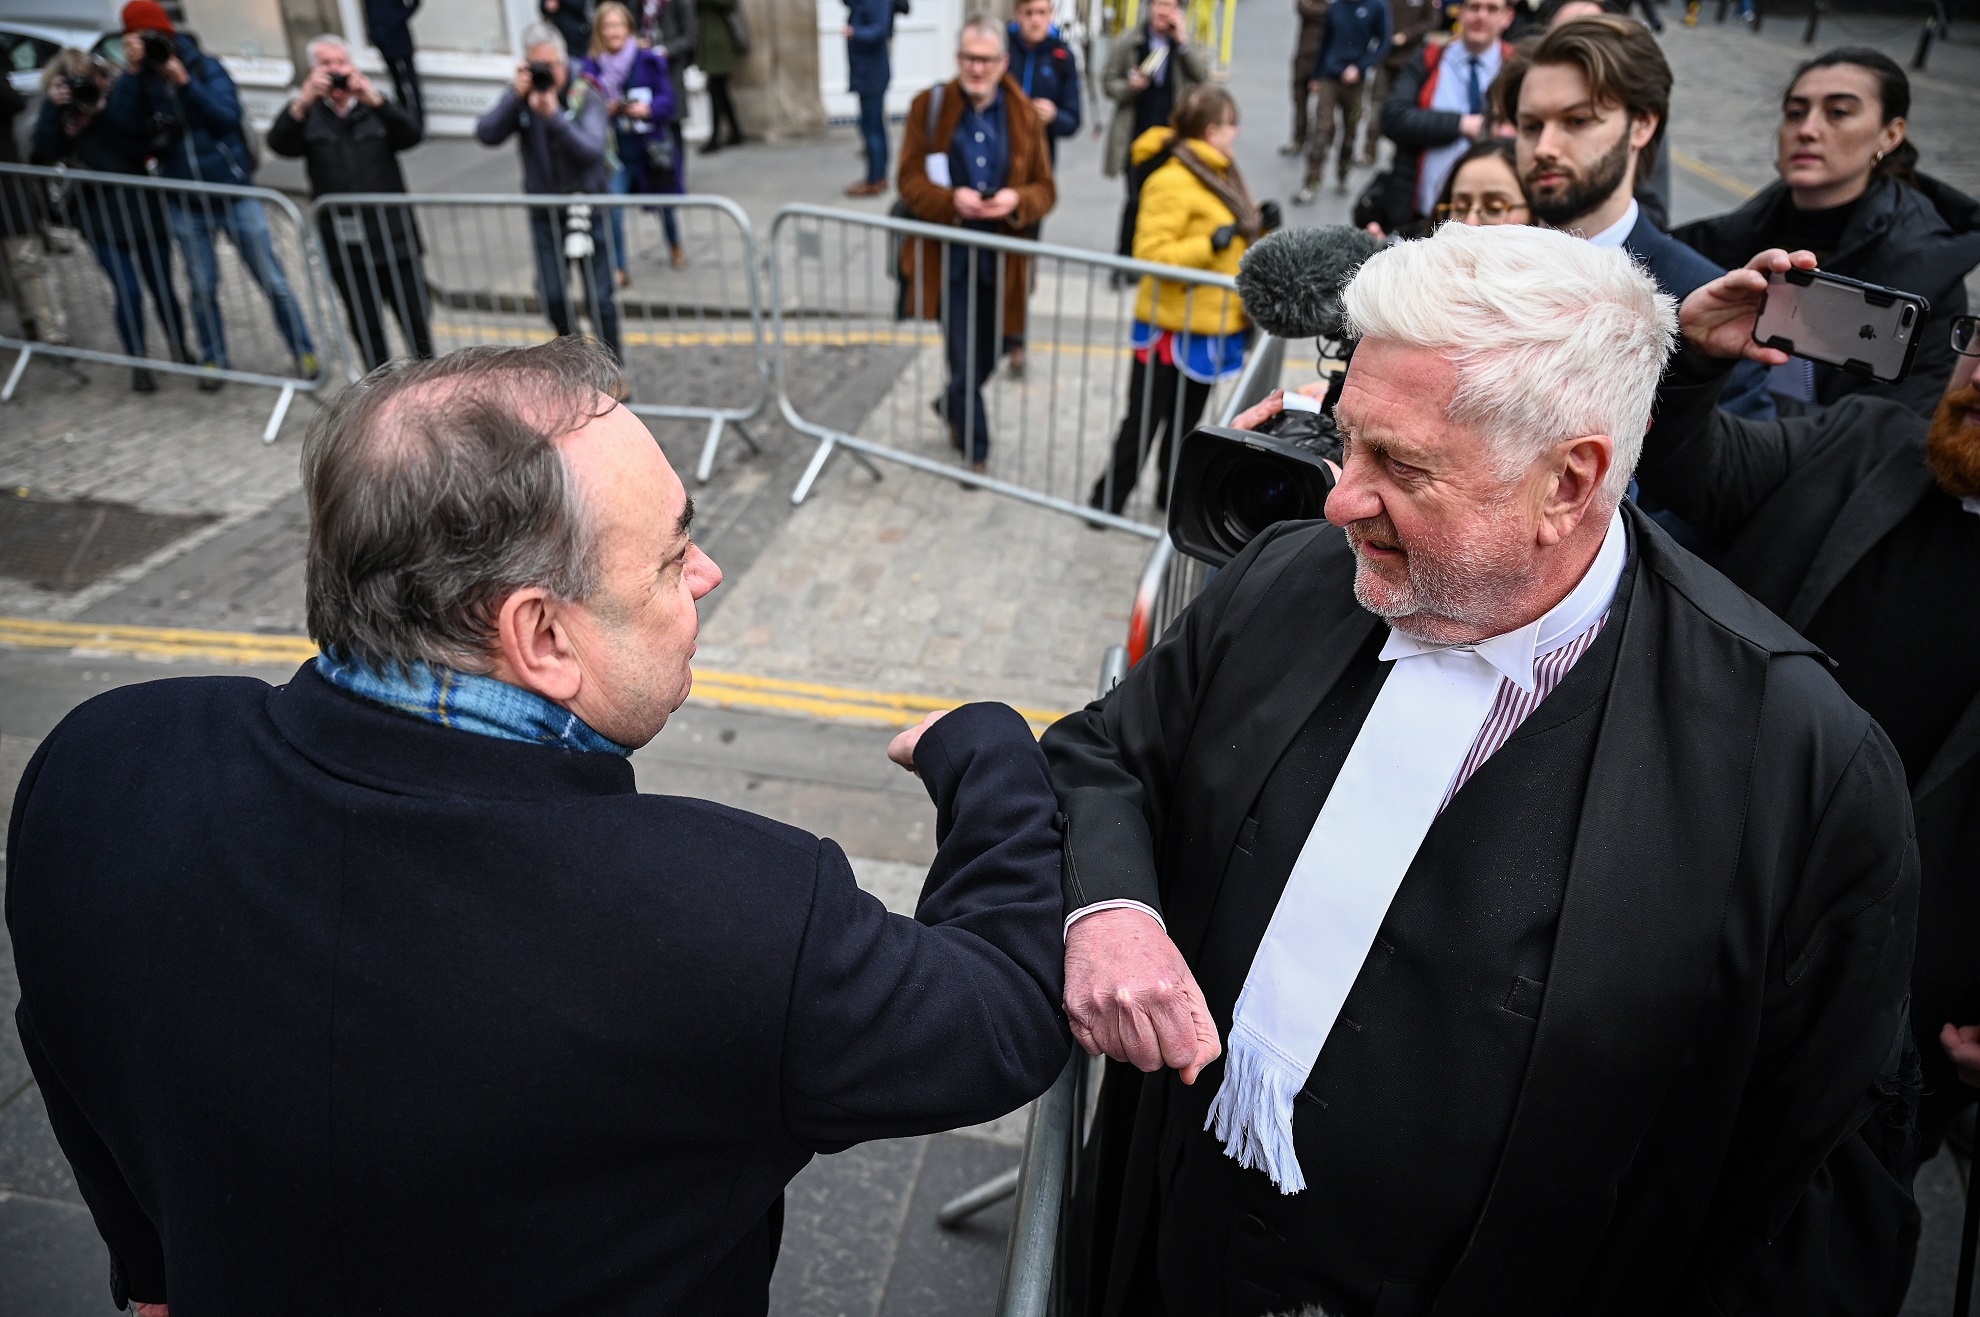 Alex Salmond with his lawyer after he was cleared of all charges at the High Court in March. (Getty Images)